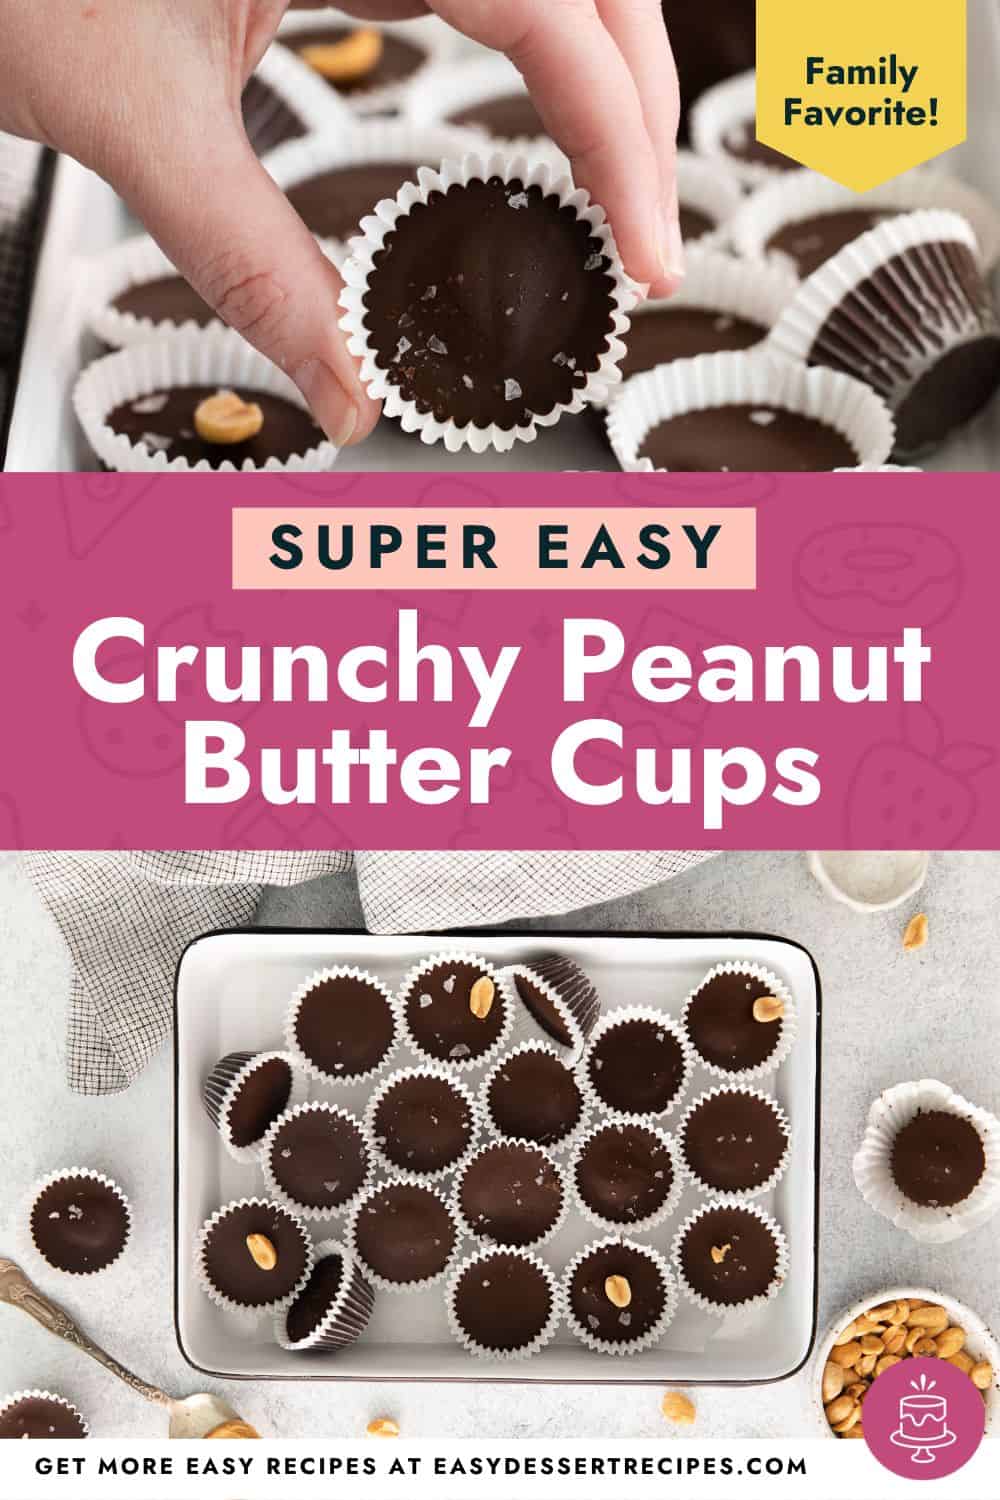 Super easy crunchy peanut butter cups.